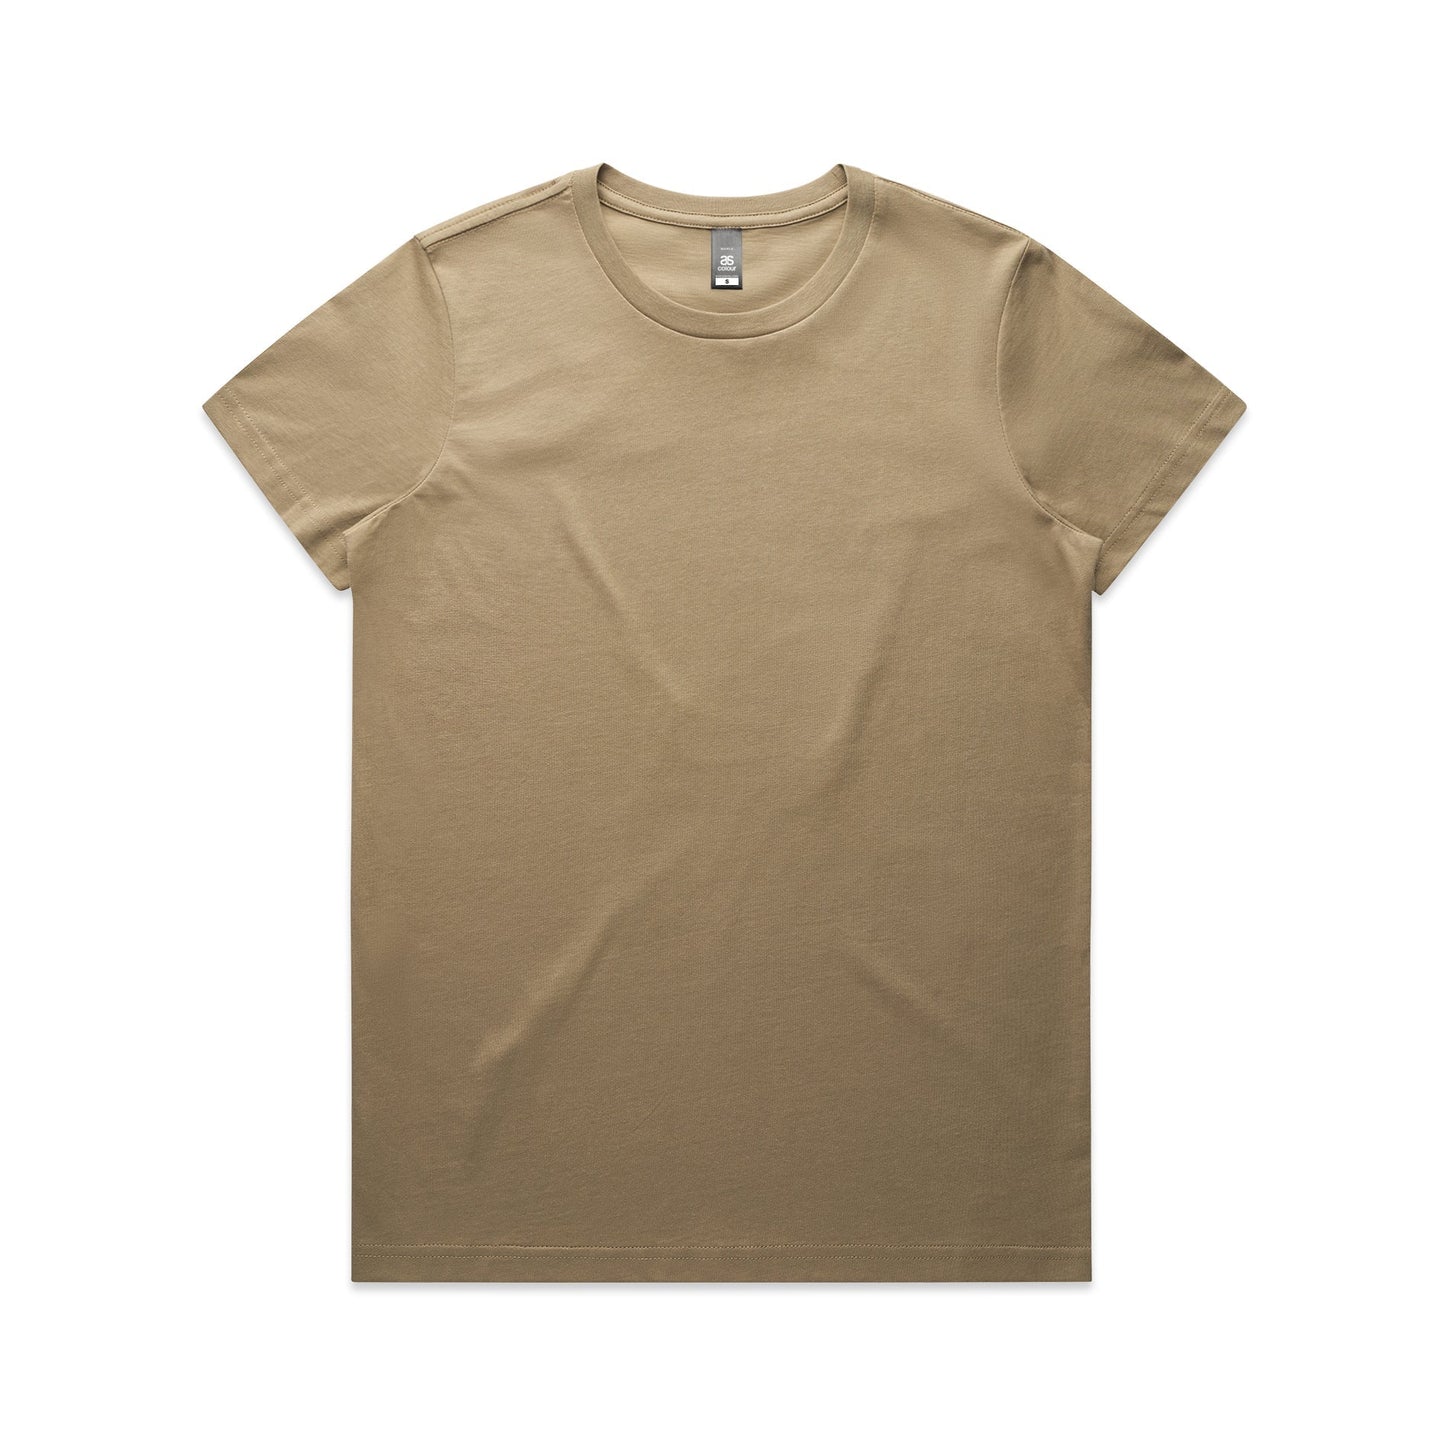 "I'm Not Great At Advice" Relaxed Maple T-Shirt